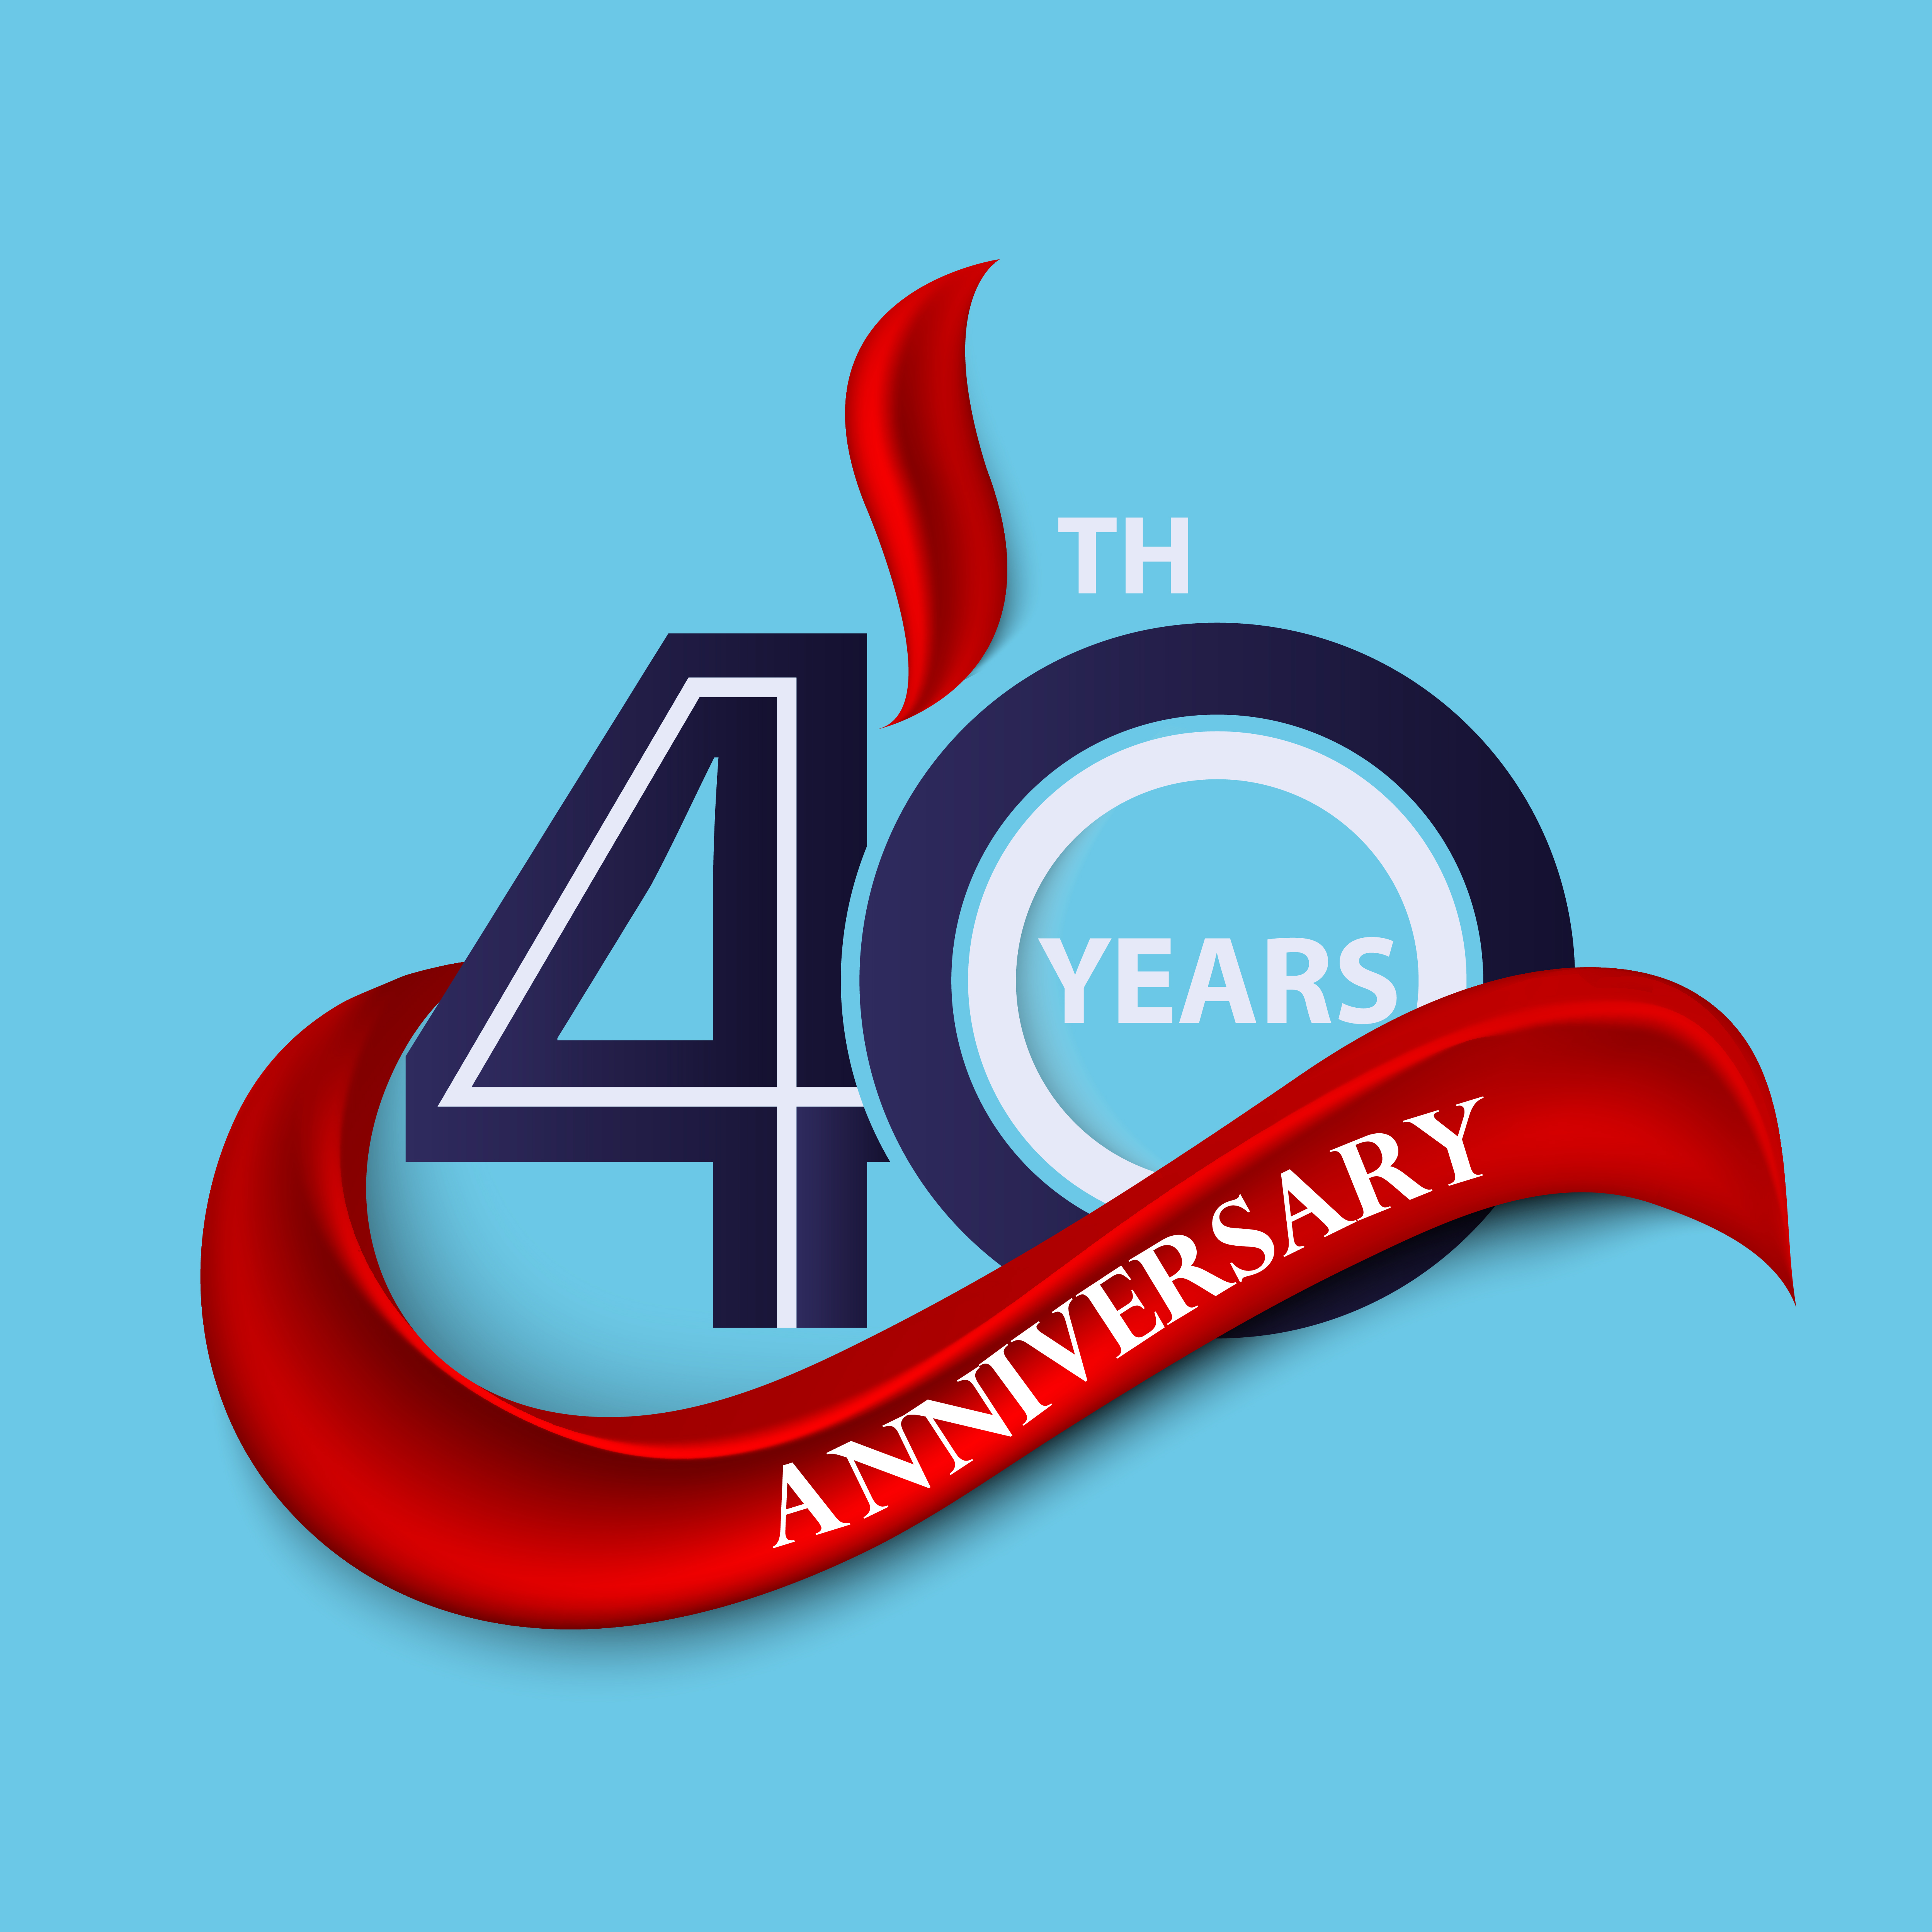 40th-anniversary-sign-and-logo-celebration-symbol-with-red-ribbon